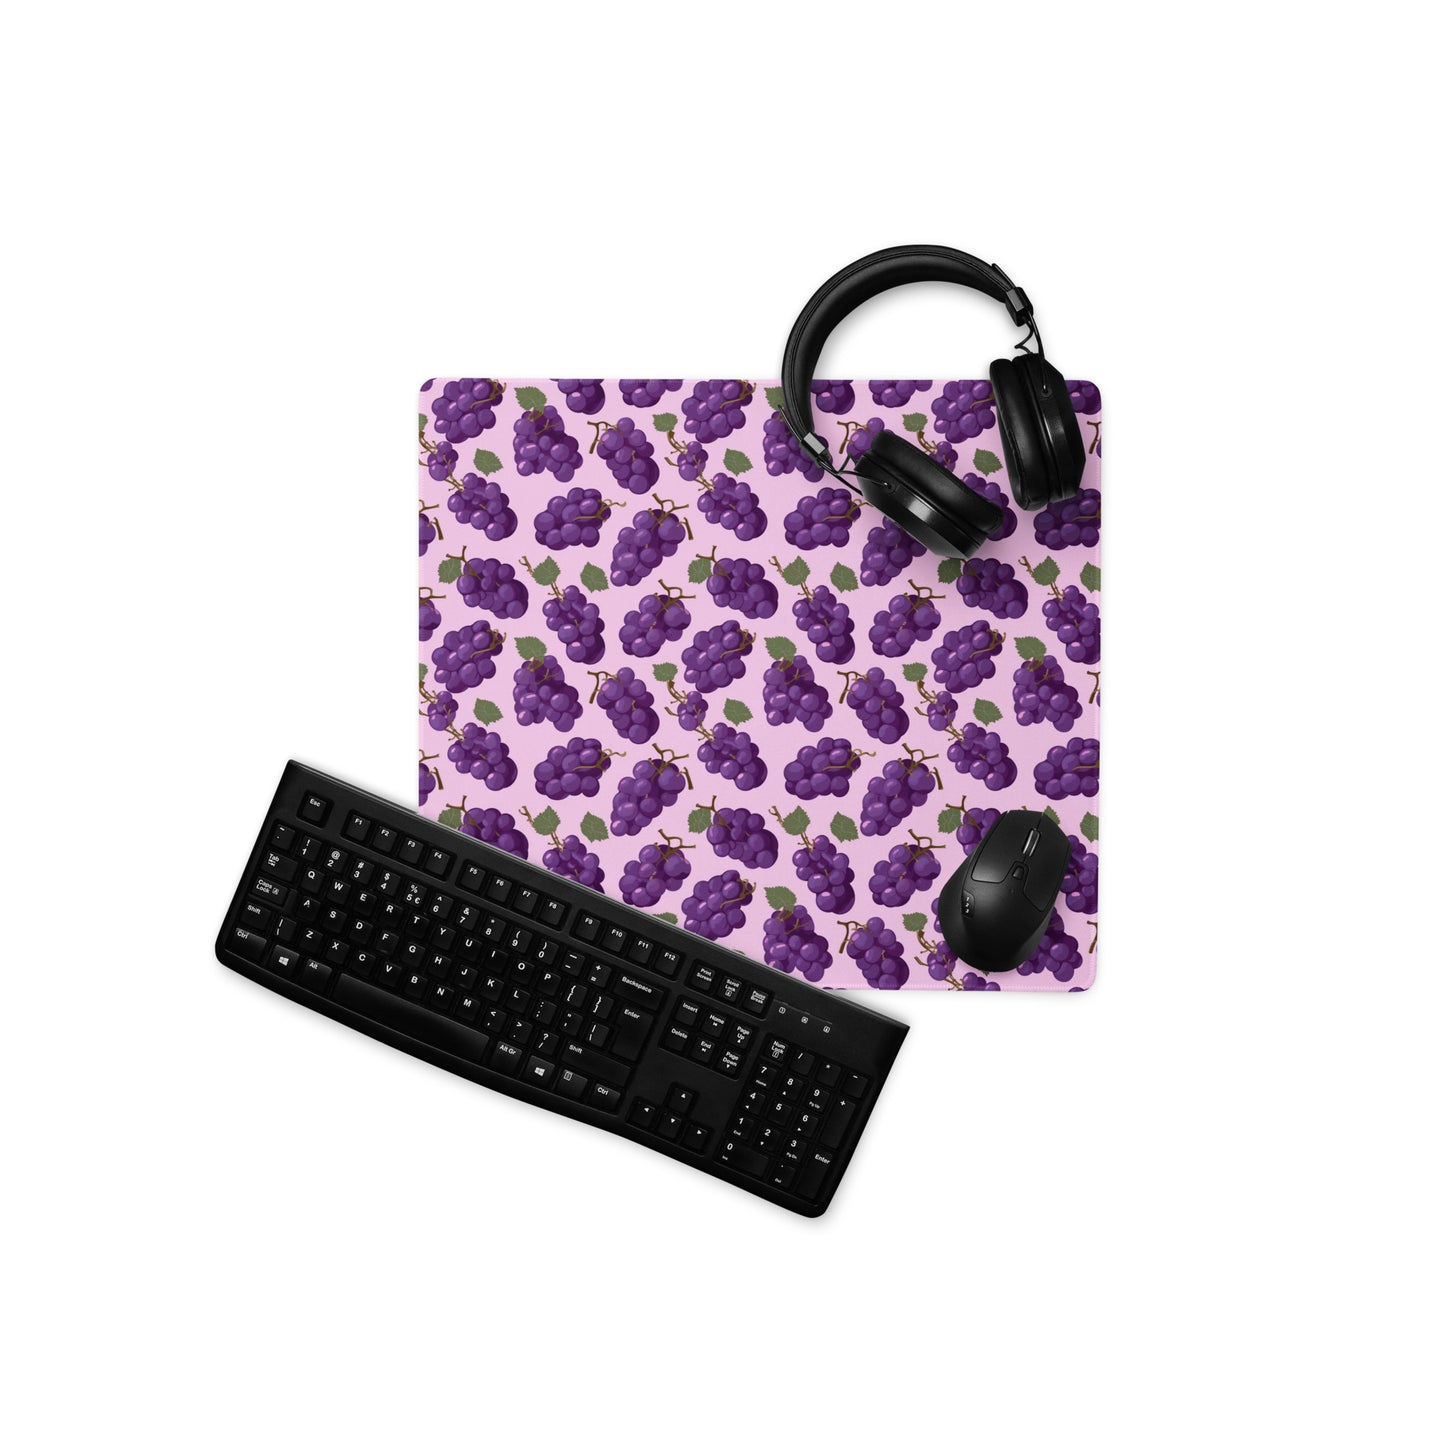 A 18" x 16" desk pad with bushels of grapes all over it displayed with a keyboard, headphones and a mouse. Purple in color.